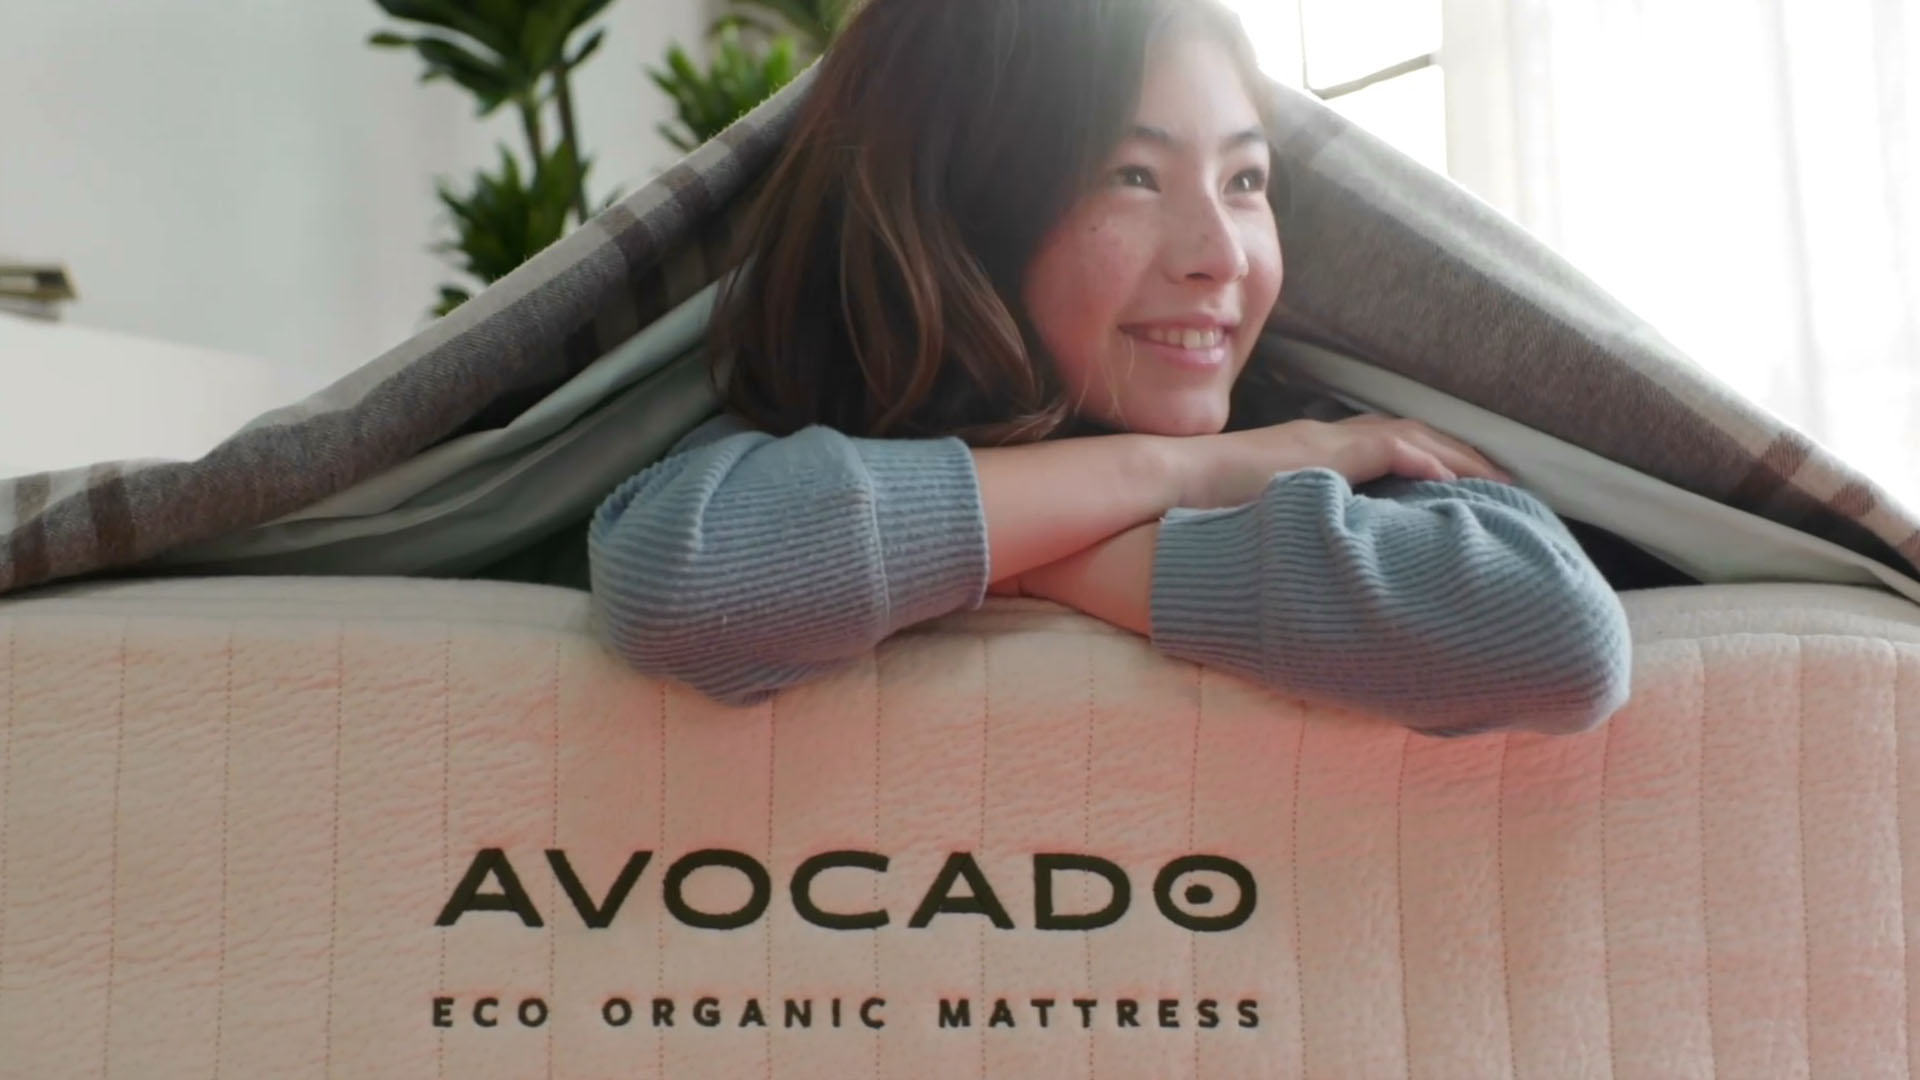 Who sells Avocado mattress near me in Coral Gables